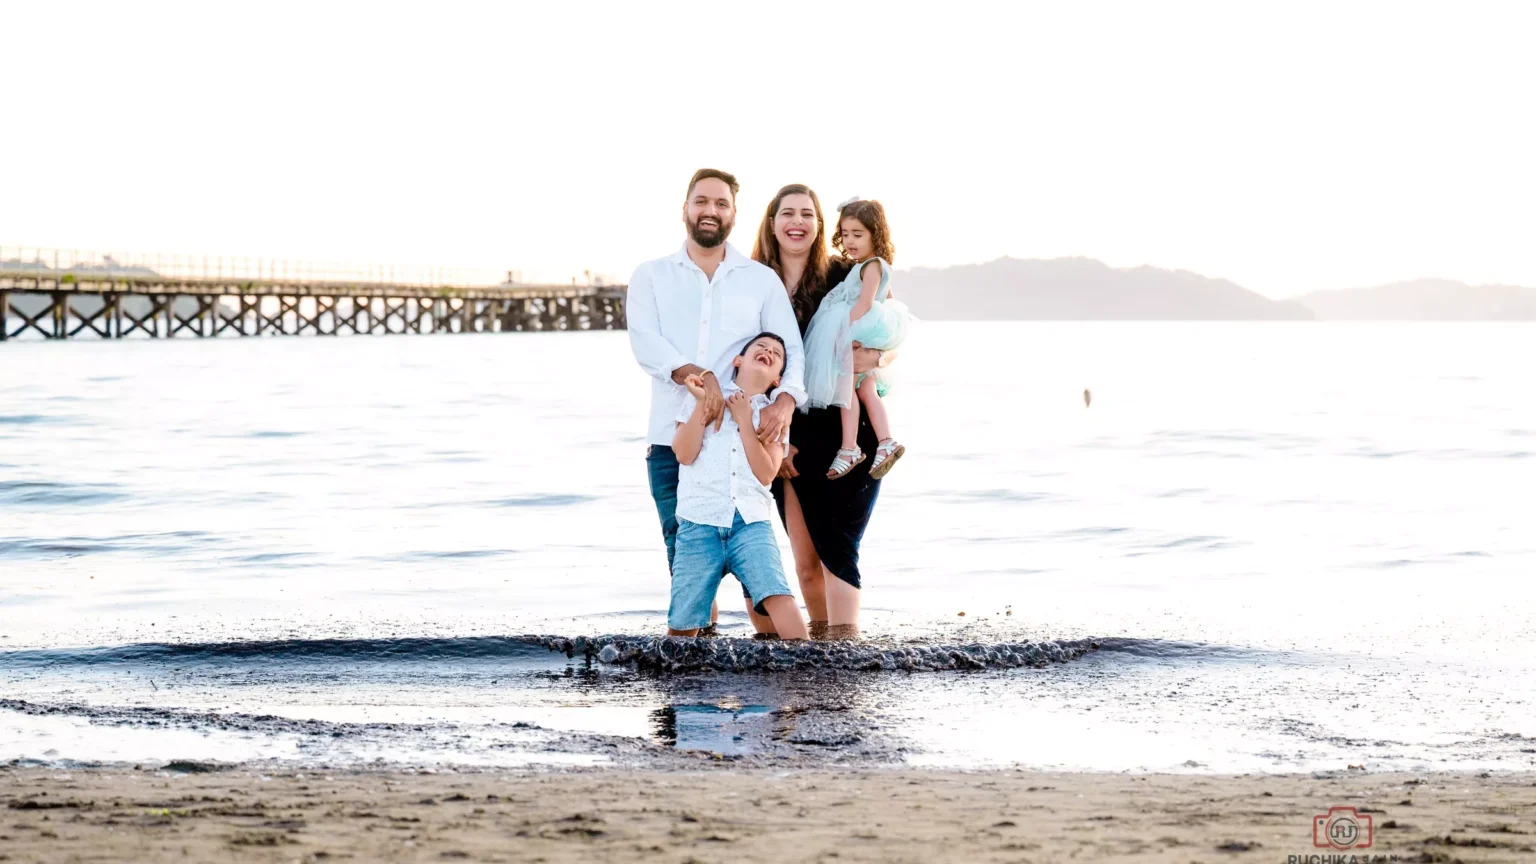 Adventurous family portrait standing in water on a beach - Dress for Family Photoshoot Guide